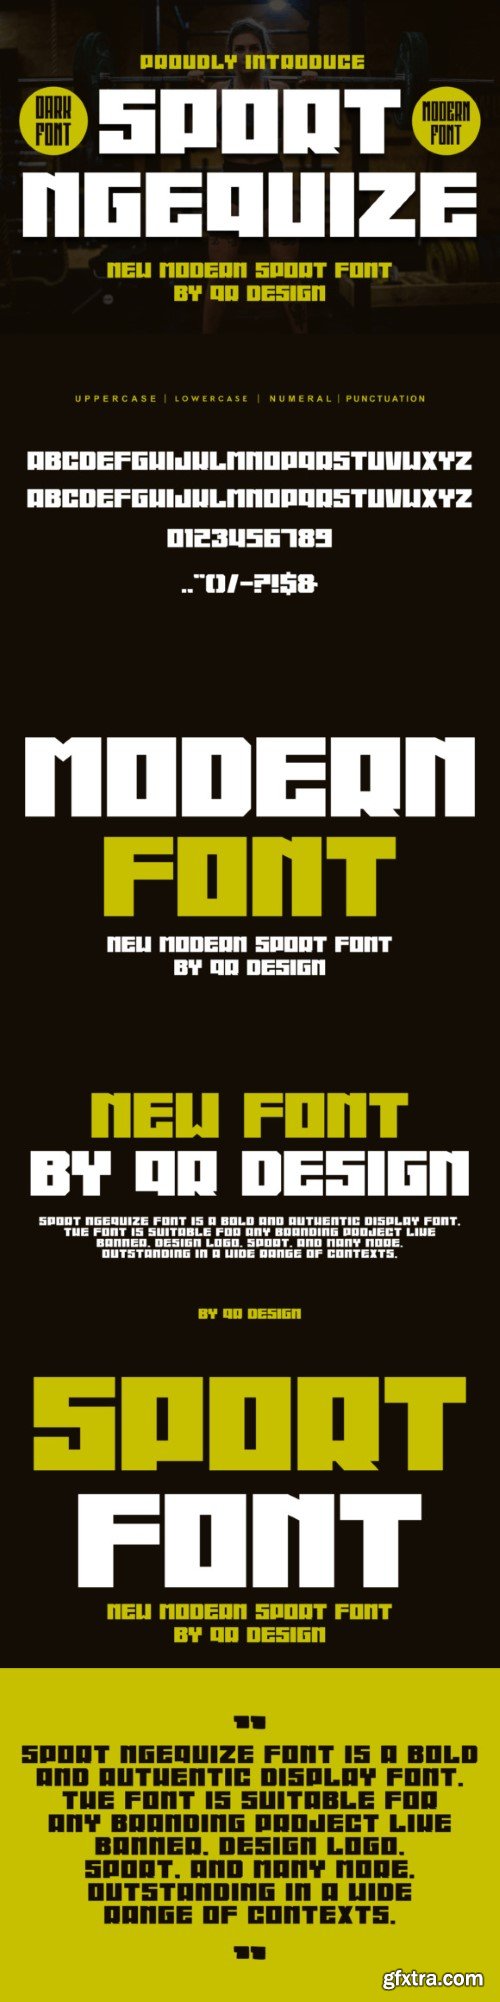 Sport Ngequize Font